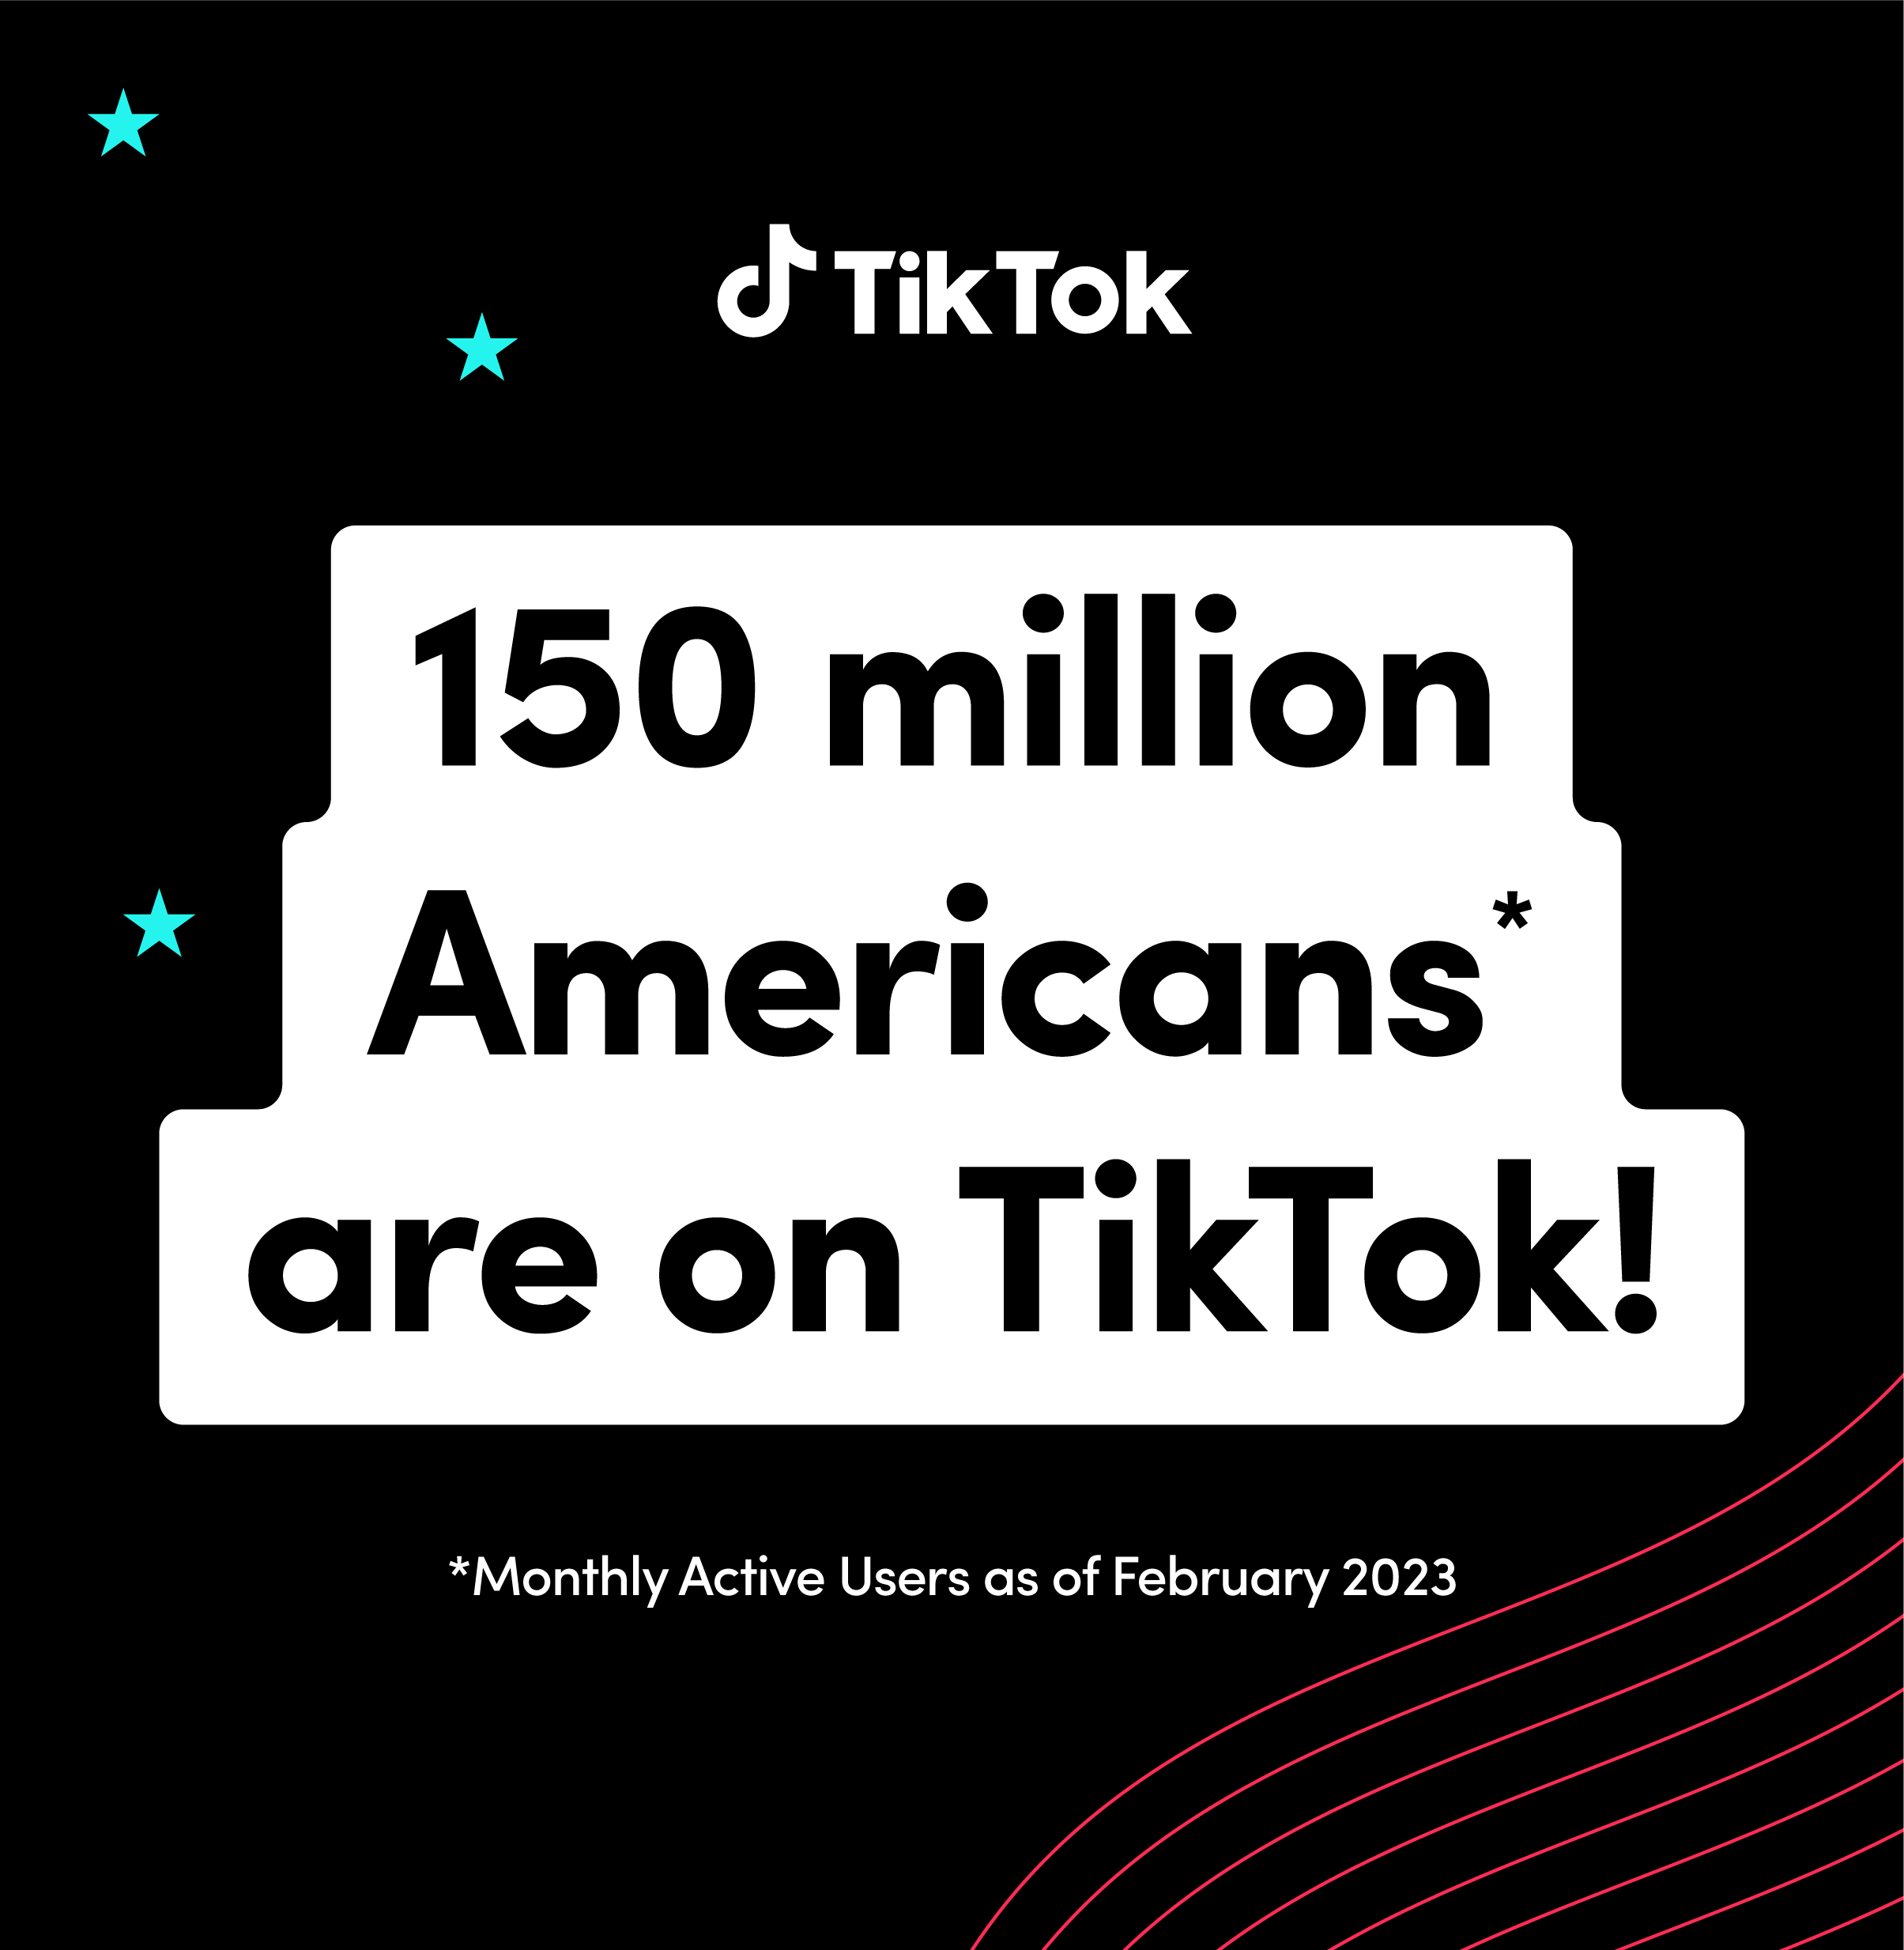 TikTok now has 150 million active users in the U.S., CEO to tell